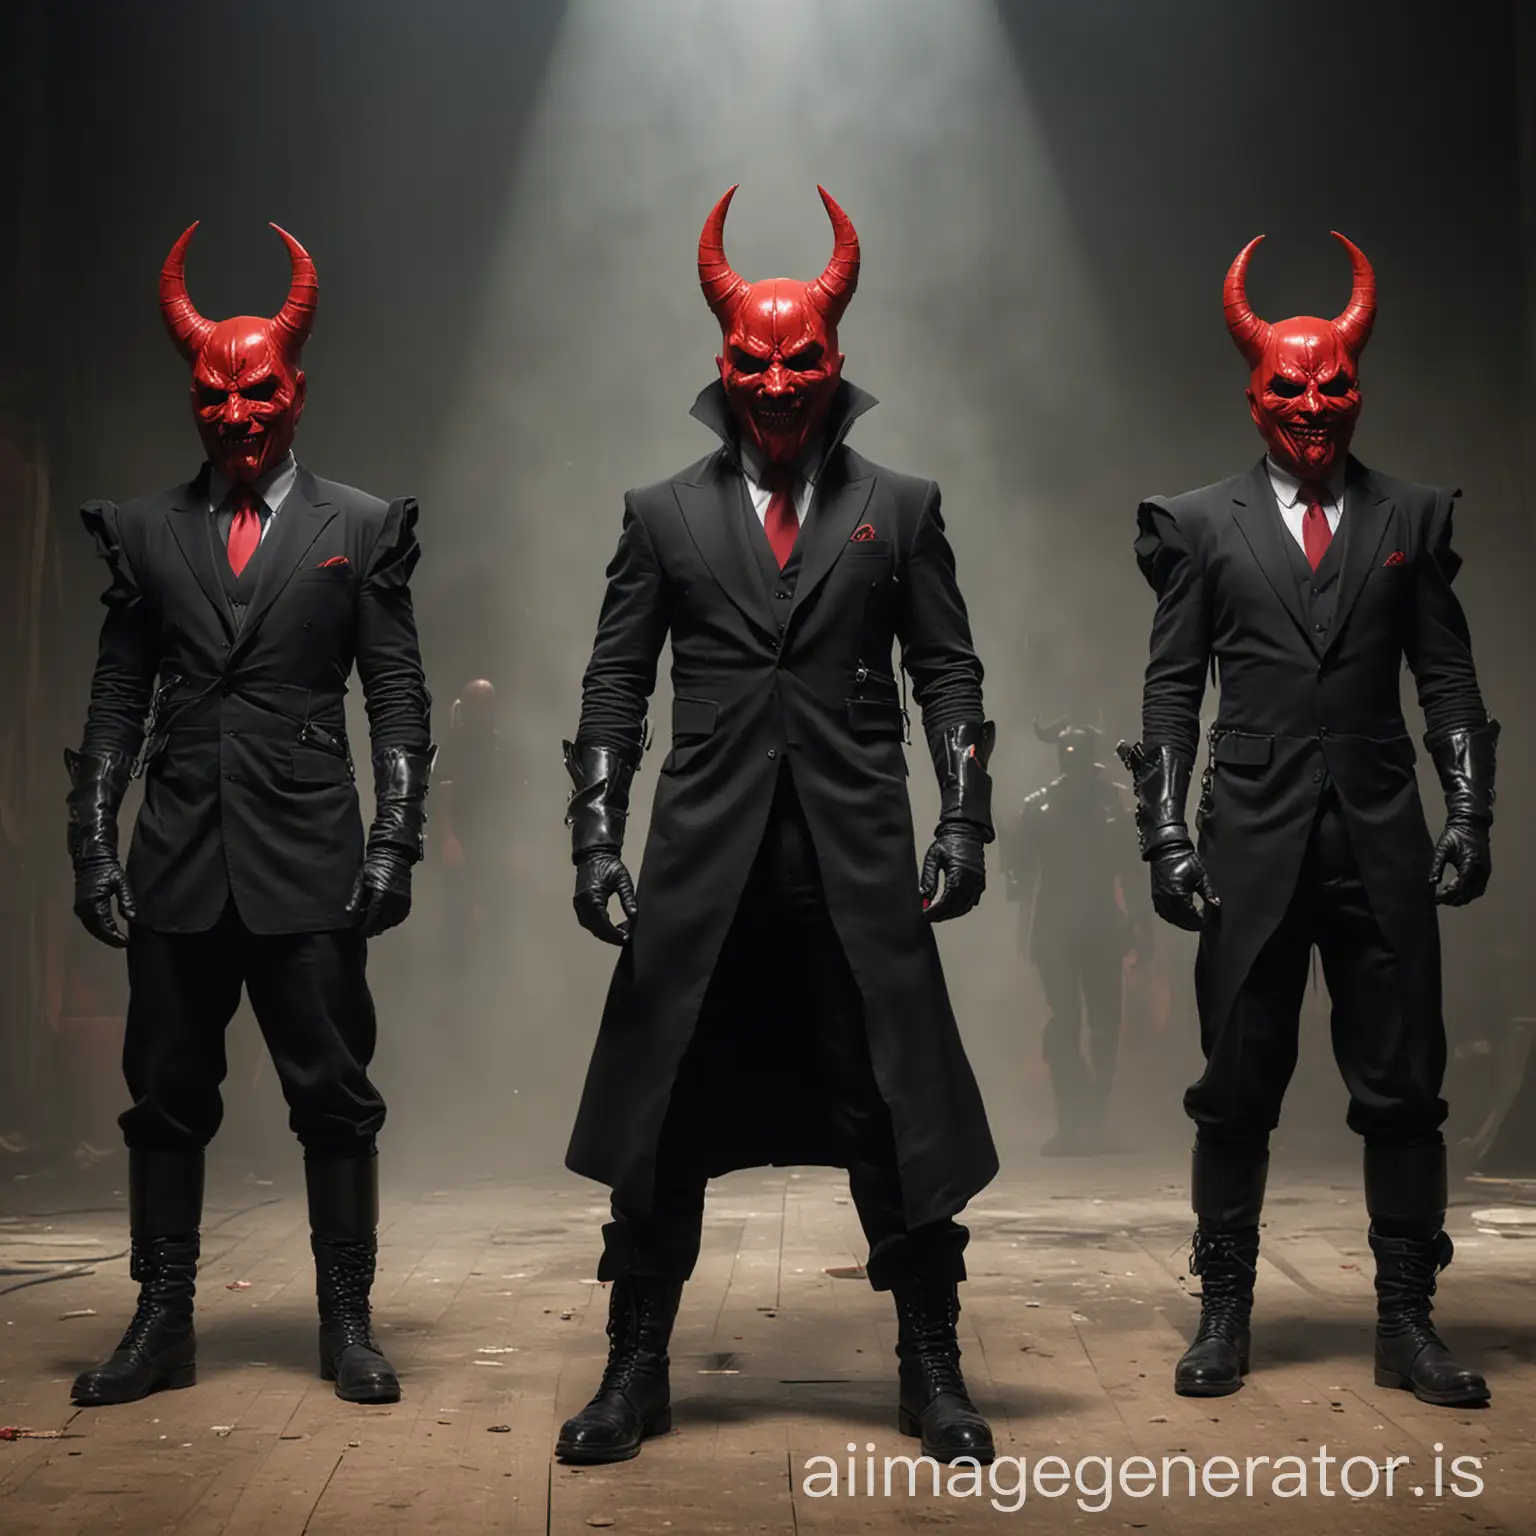 Man, 1.93 tall, dressed all in elegant black, with black gloves, black boots, and a red devil mask. Together with the 2 bodyguards of 2.20 meters tall, on a stage, heading towards destruction